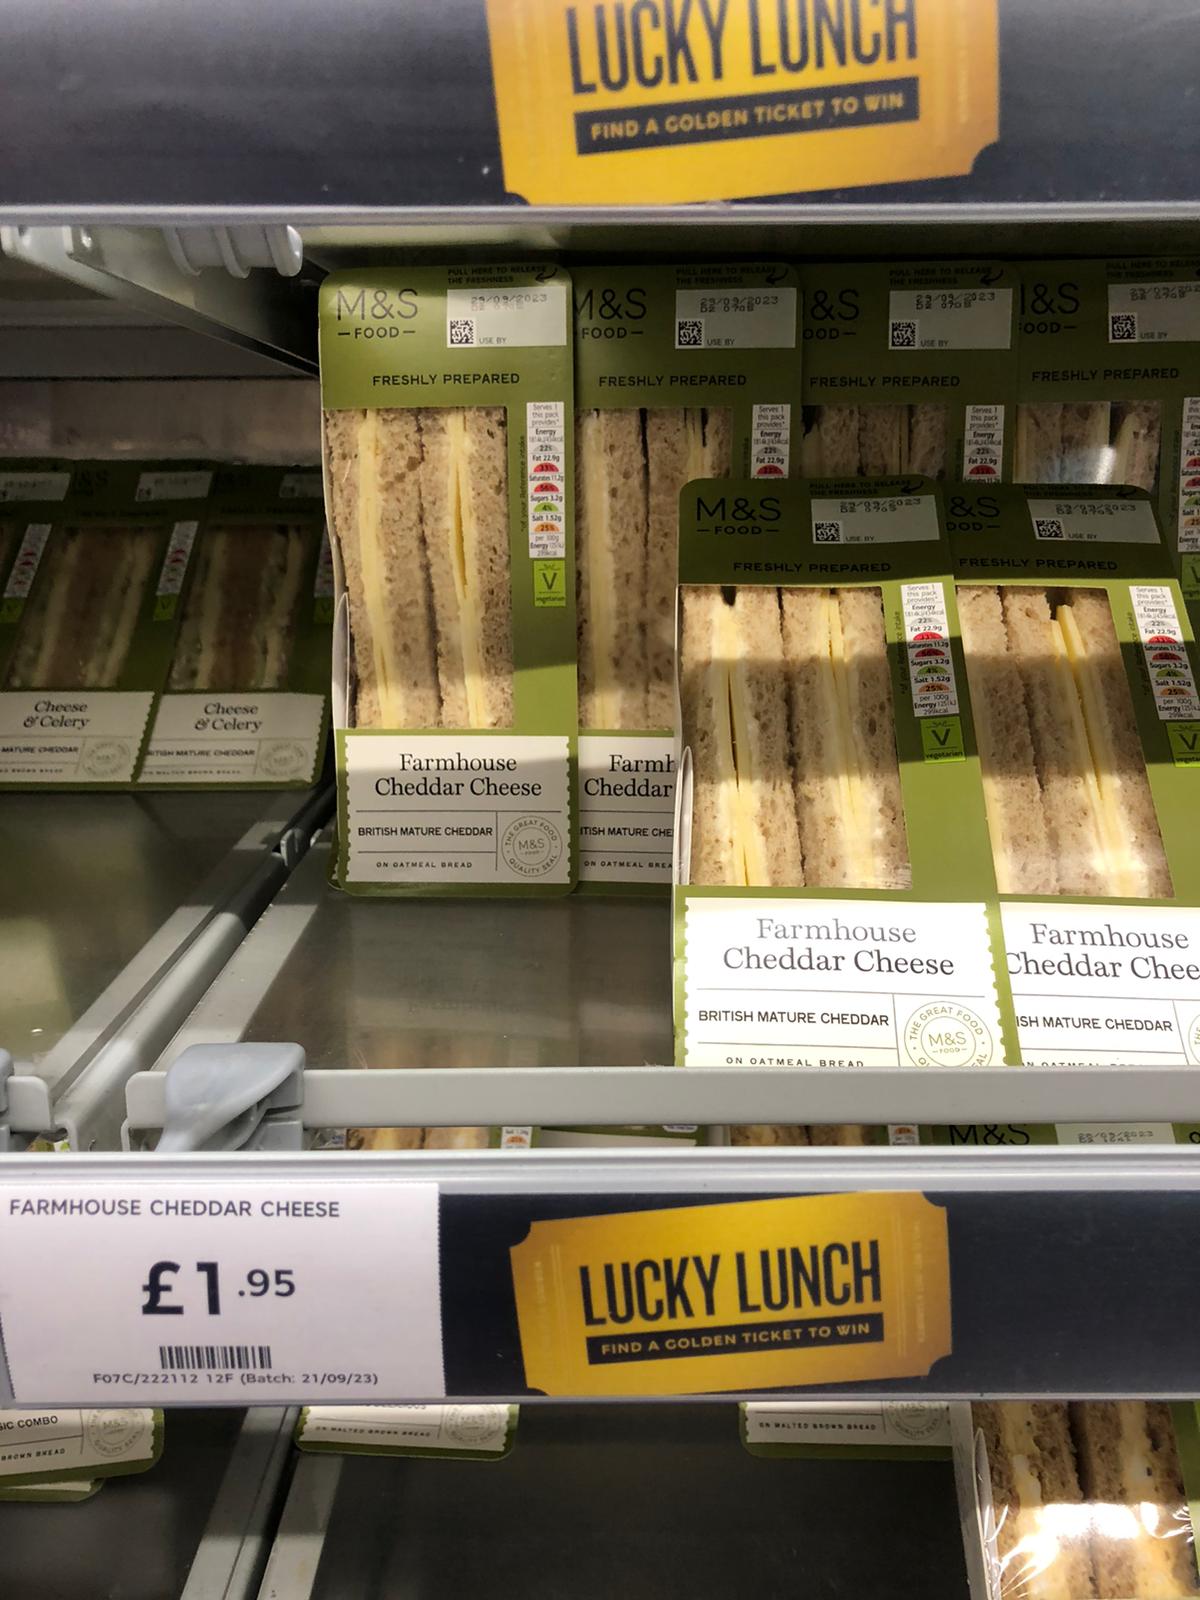 A simple cheese sandwich costs ?1.95 at Marks and Spencer